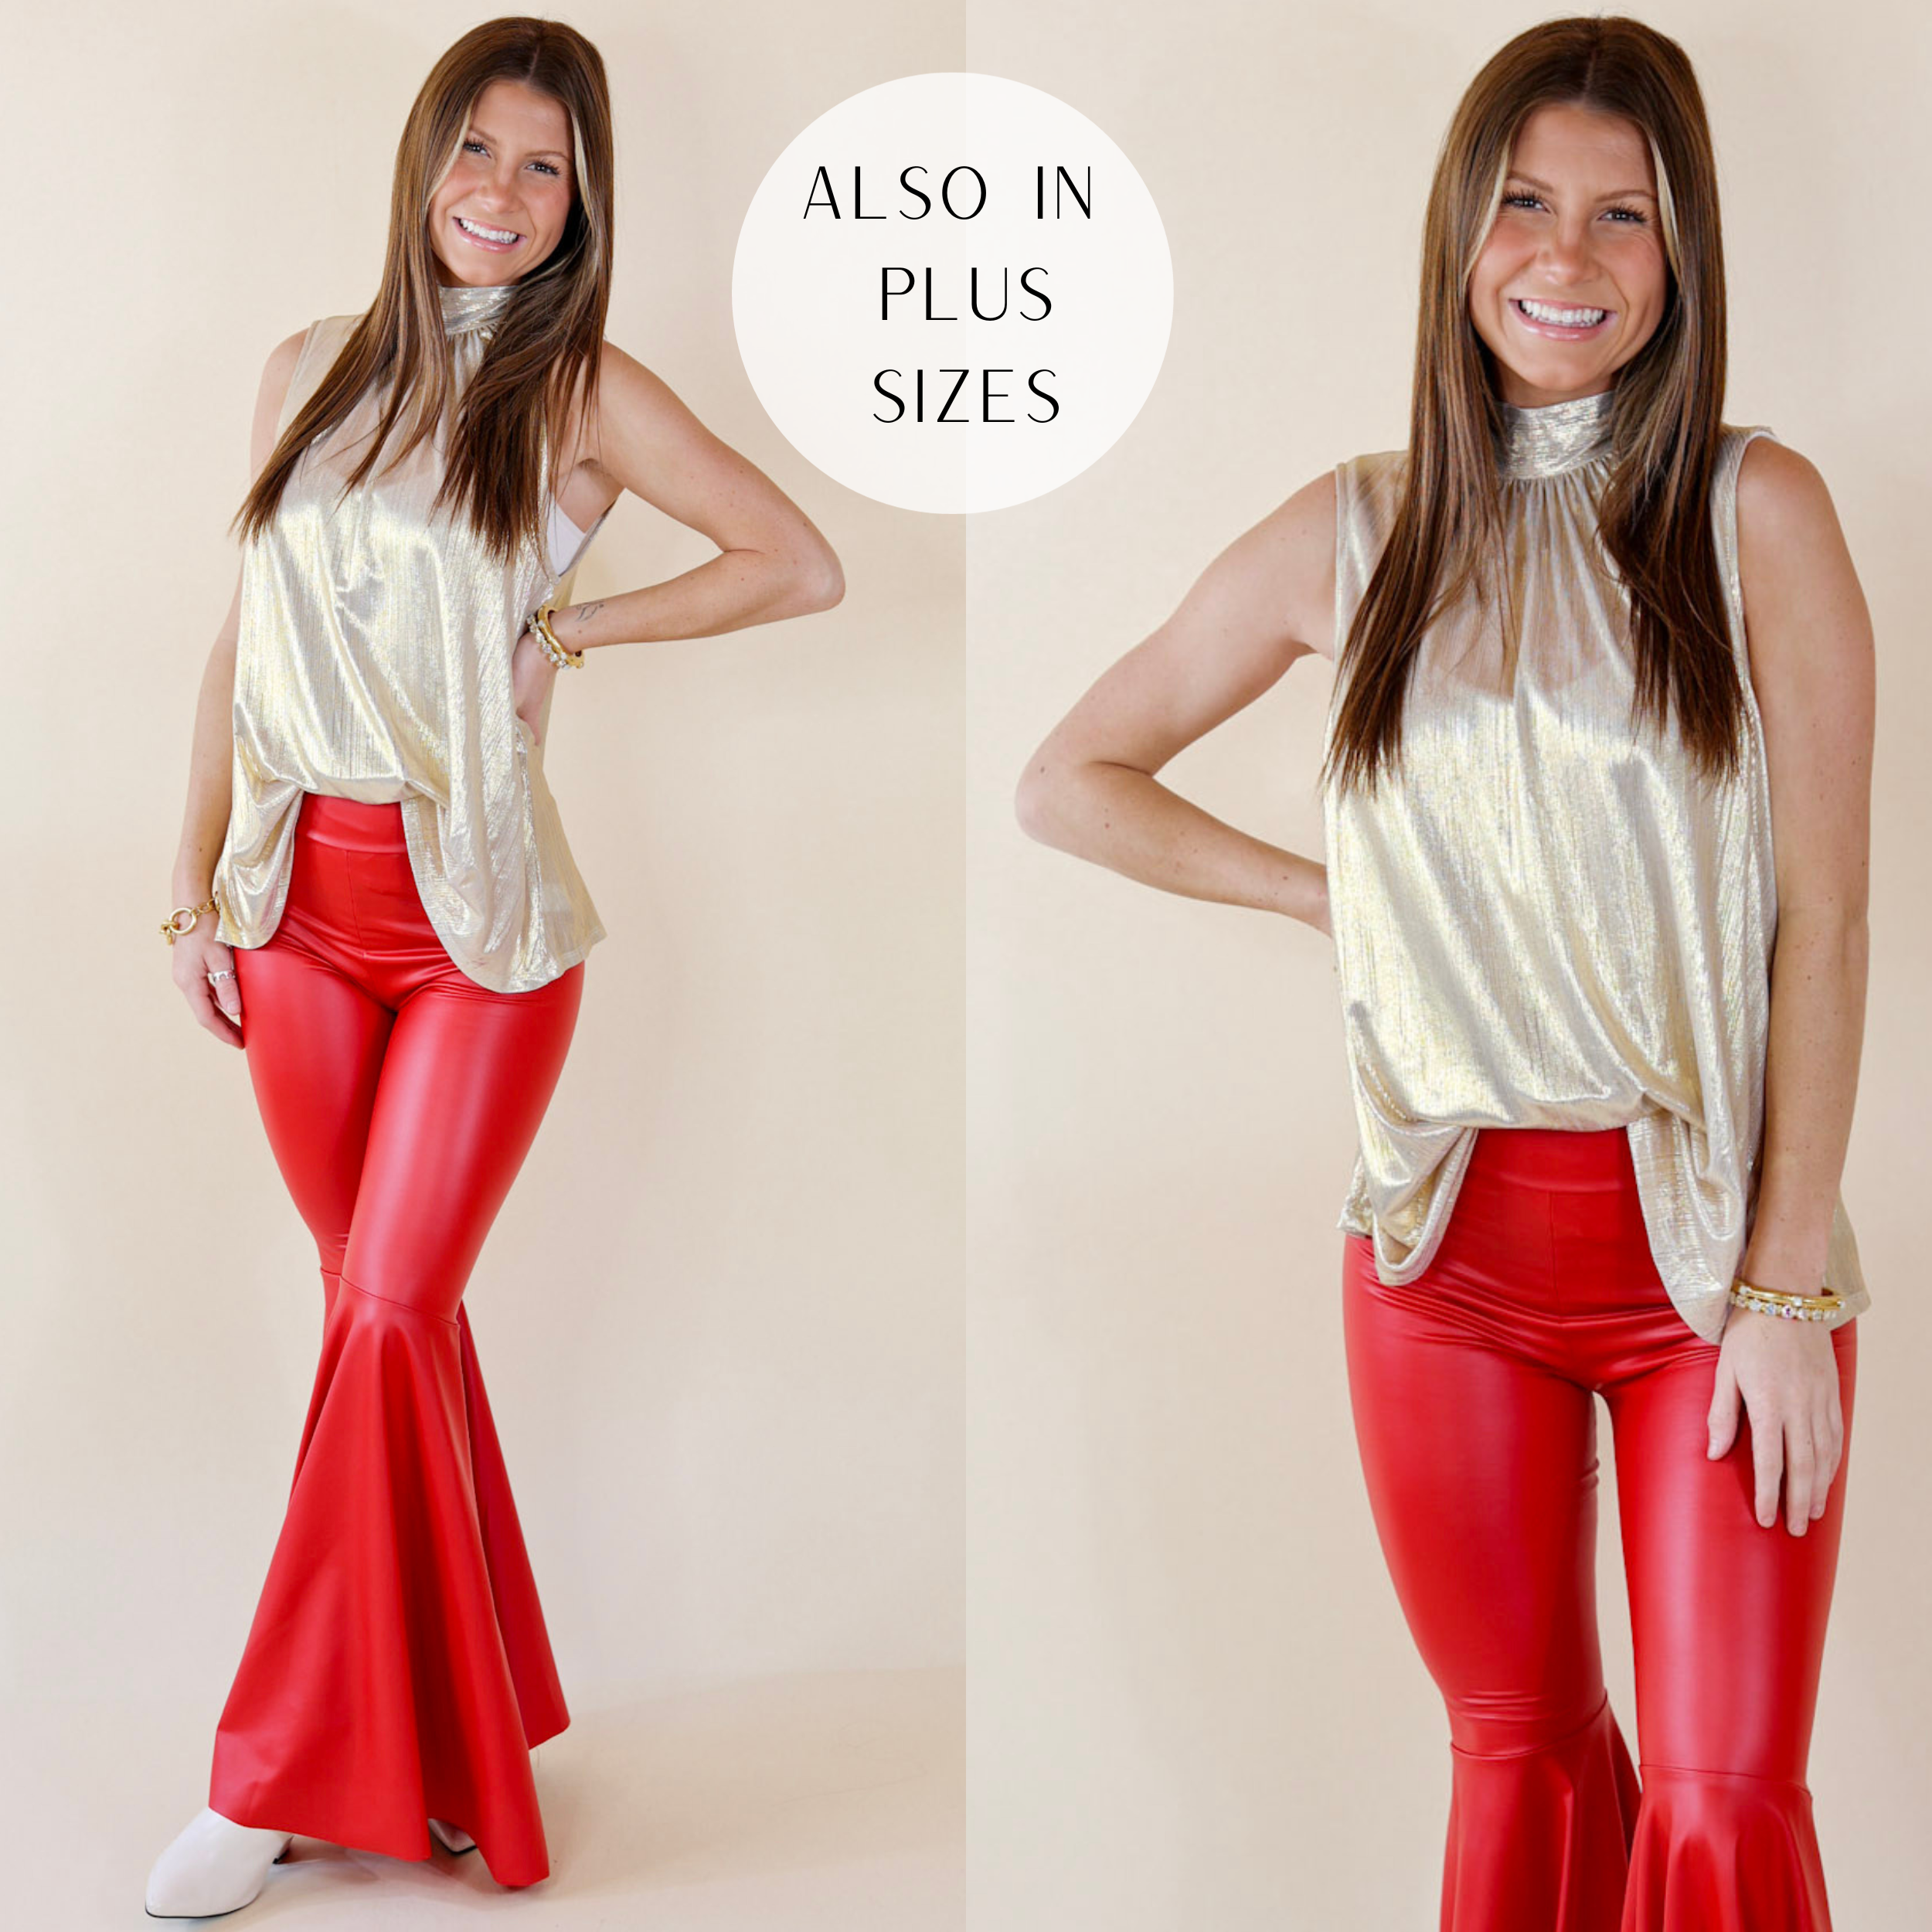 Model is wearing a gold metallic top with a mock neck. Model has it paired with red faux leather pants, white booties, and gold jewelry.